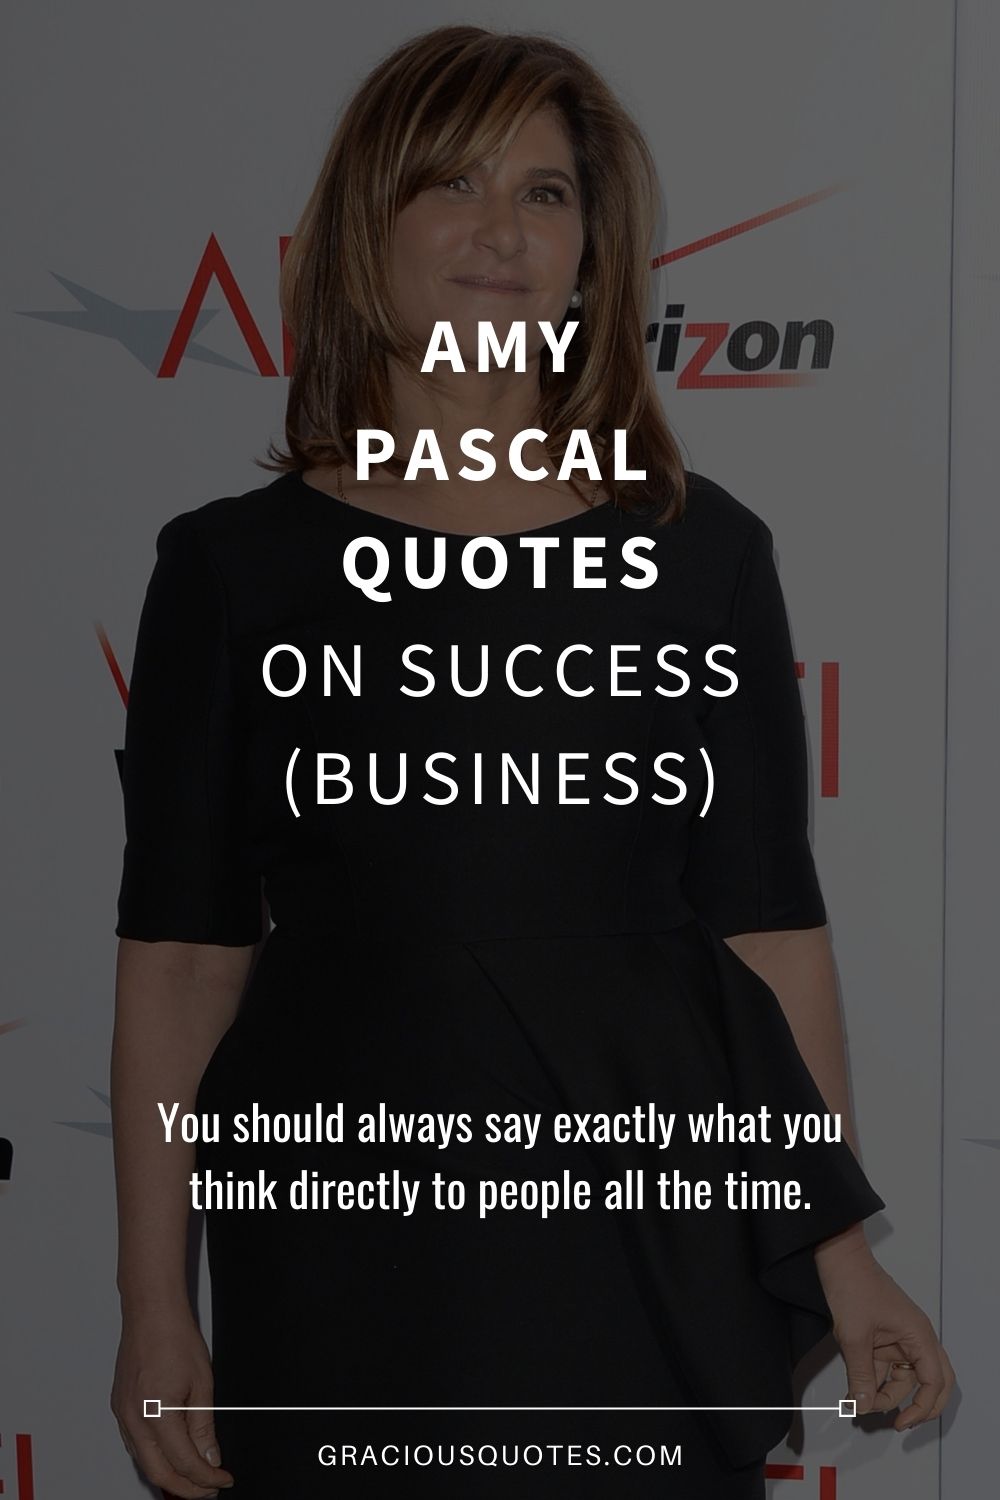 Amy Pascal Quotes on Success (BUSINESS) - Gracious Quotes